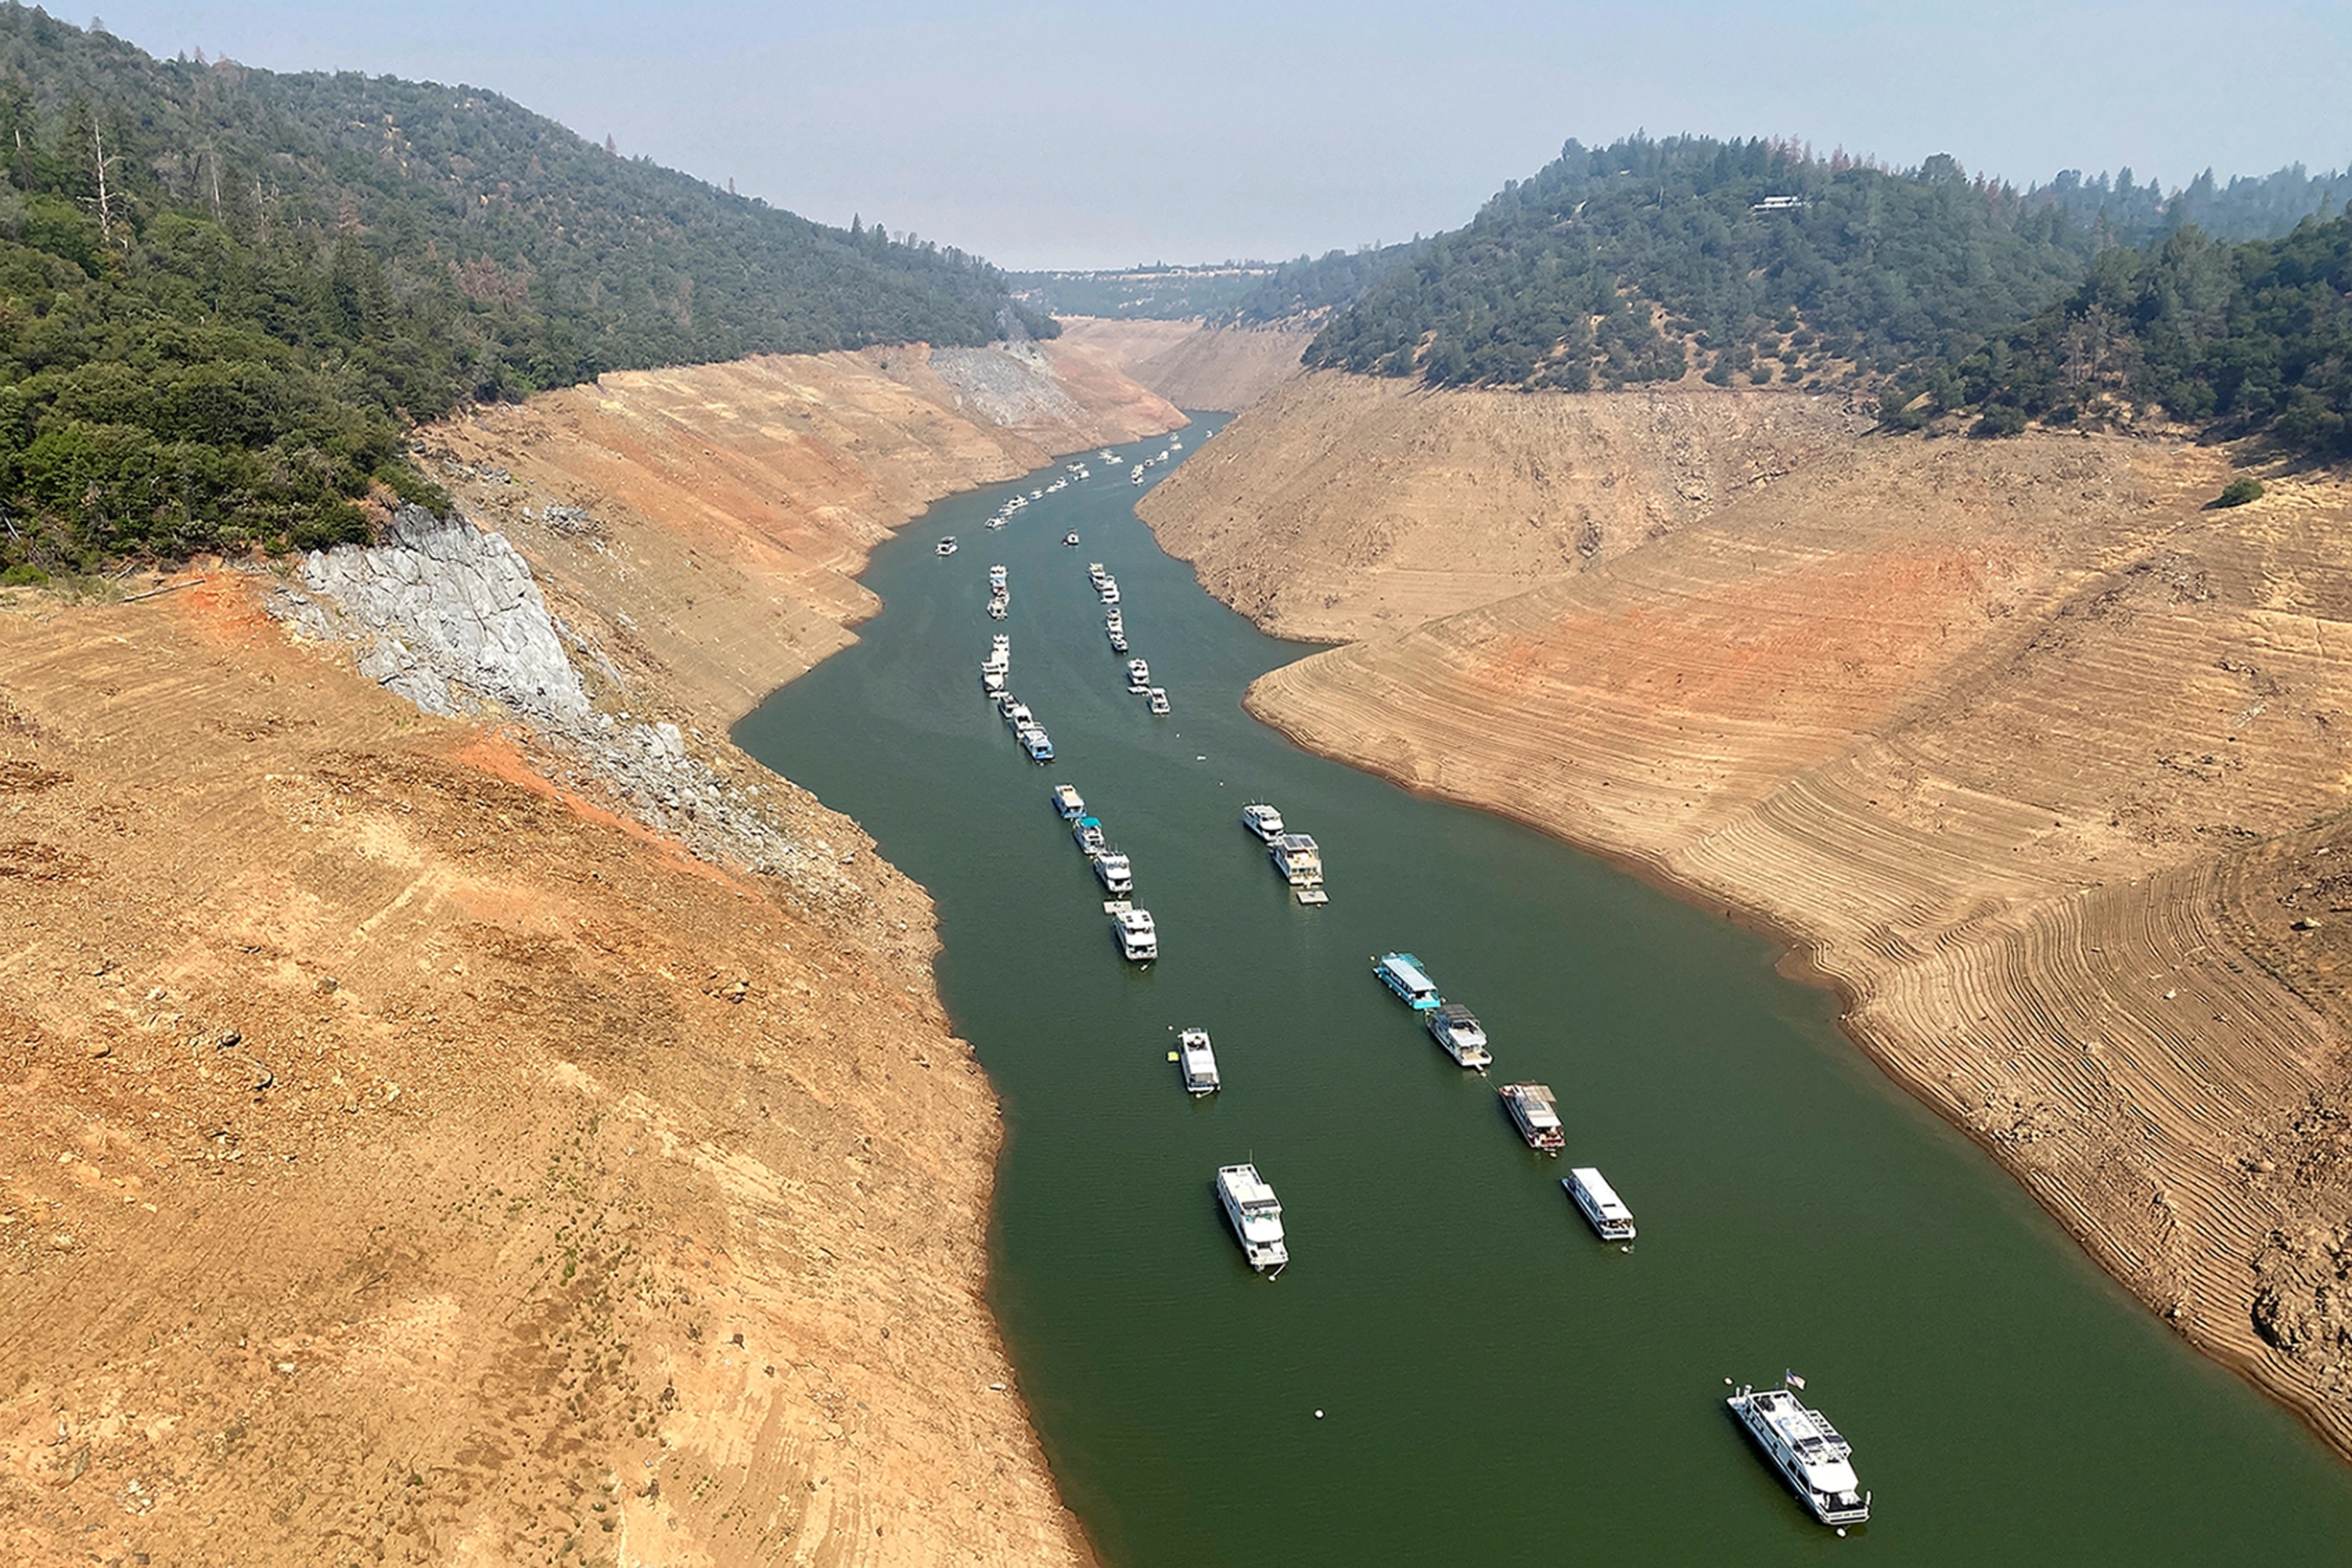 Boats and houseboats are moored at record low water at Lake Oroville near Pentz, California